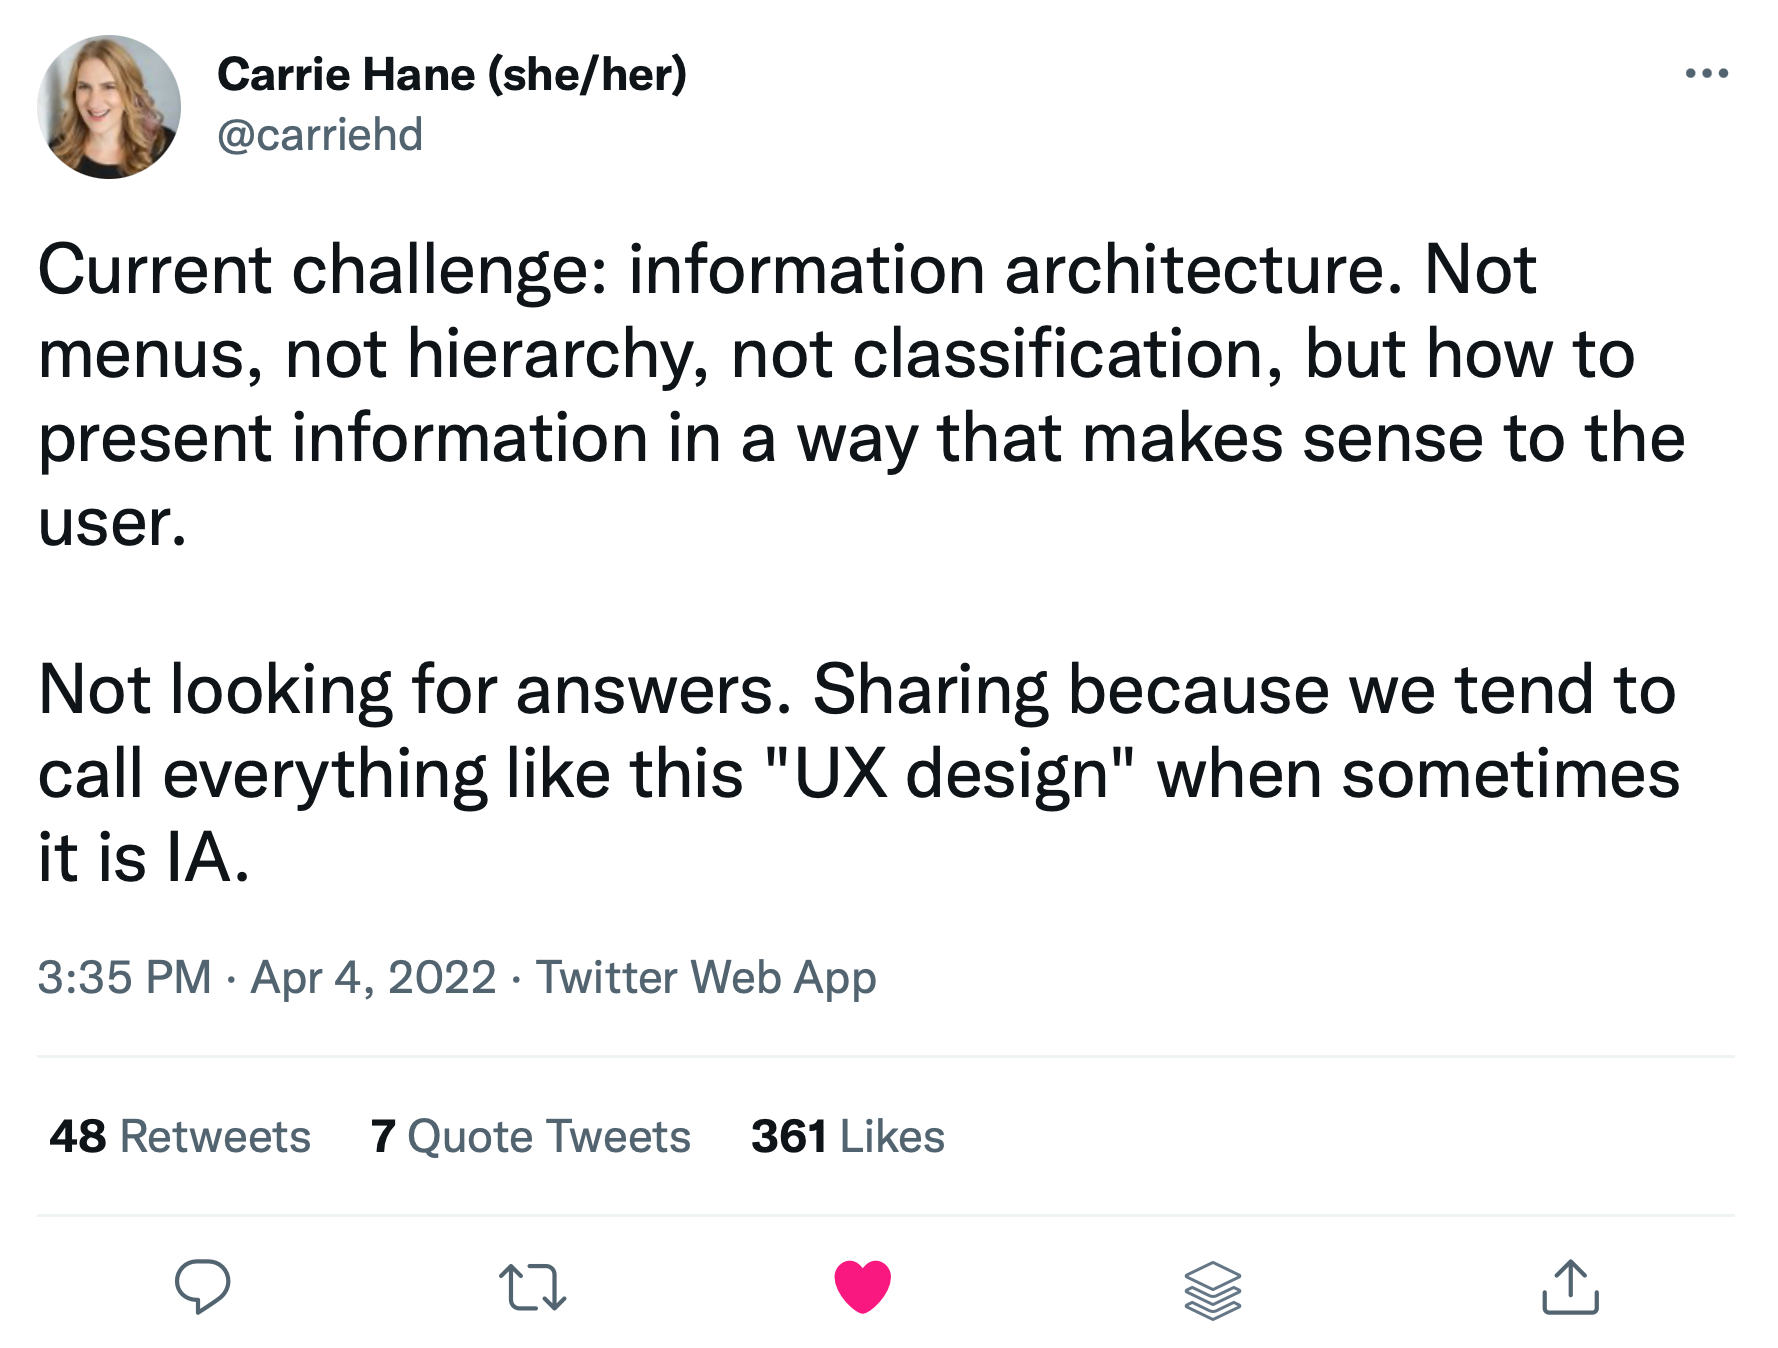 A tweet from Carrie Hane that reads: 'Current challenge: information architecture. Not menus, not hierarchy, not classification, but how to present information in a way that makes sense to the user. Not looking for answers. Sharing because we tend to call everything like this 'UX design' when sometimes it is IA.'